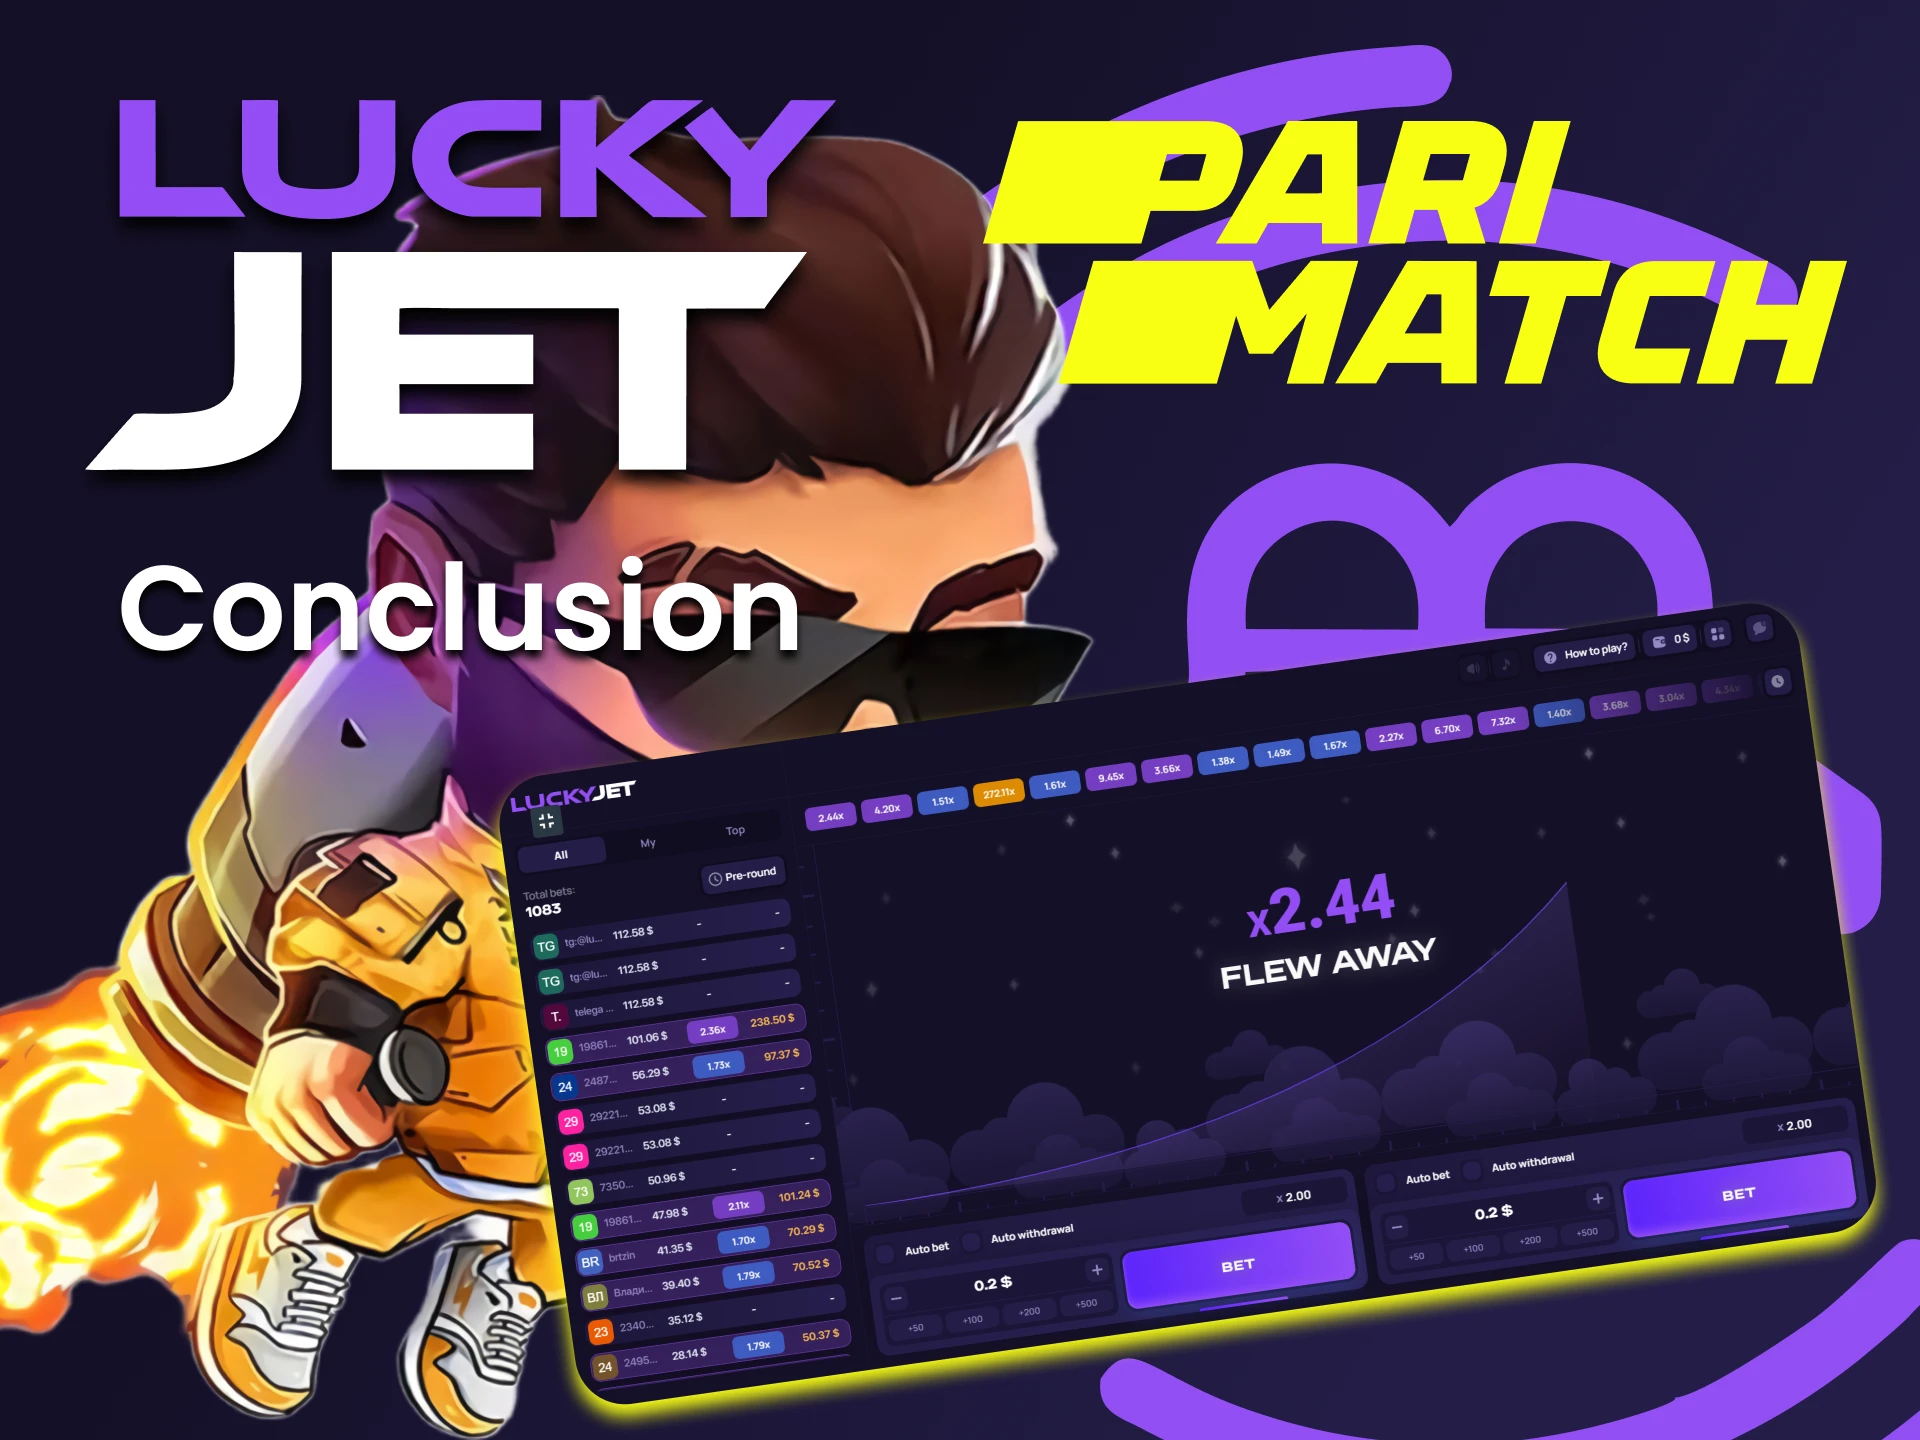 Lucky Jet is the perfect choice for games at Parimatch.